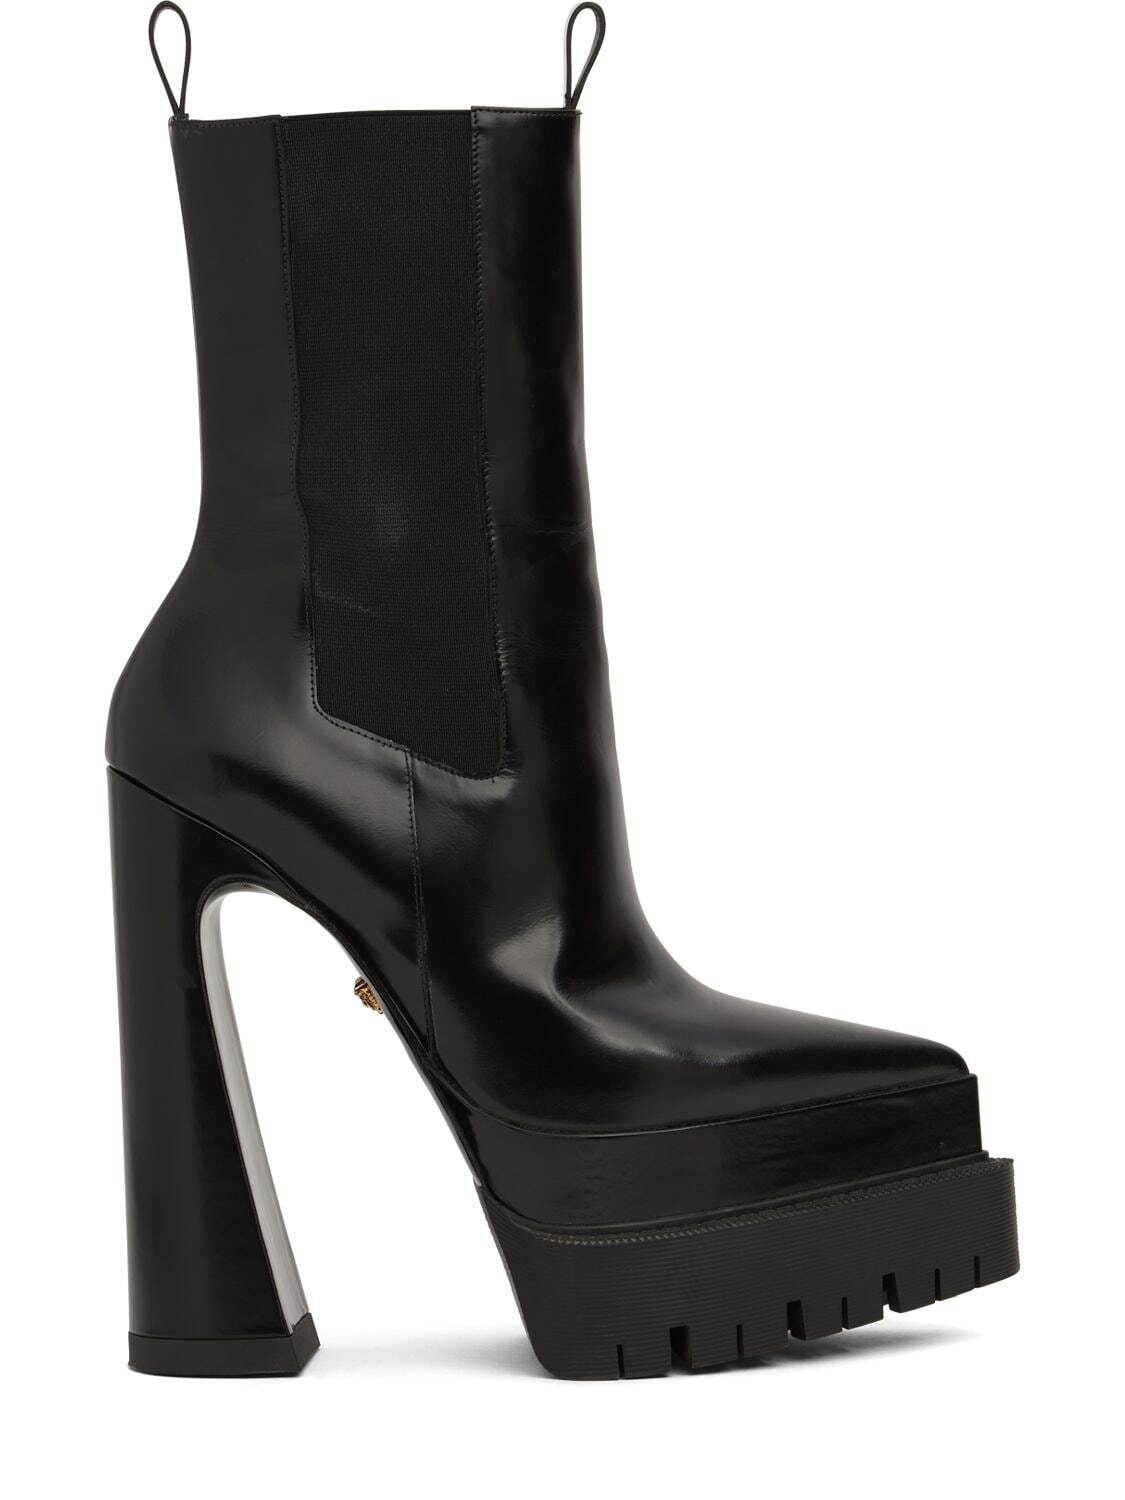 VERSACE 160mm Leather Platform Ankle Boots in black